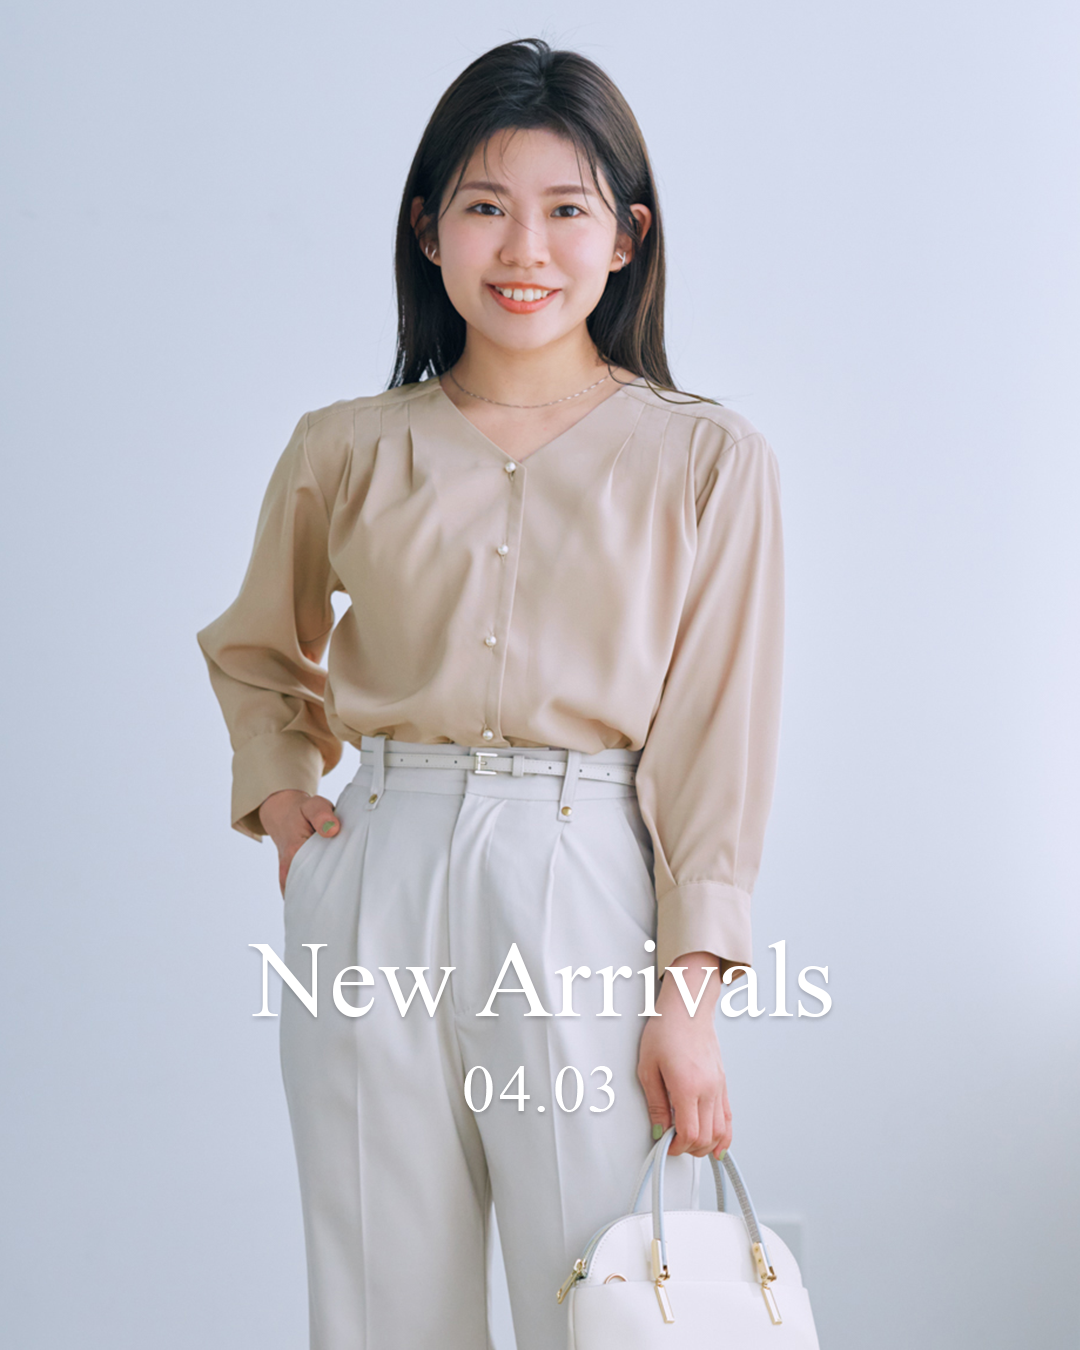 Weekly New Arrivals】04.03(Wed)発売の新作アイテム一覧 – COHINA STORE